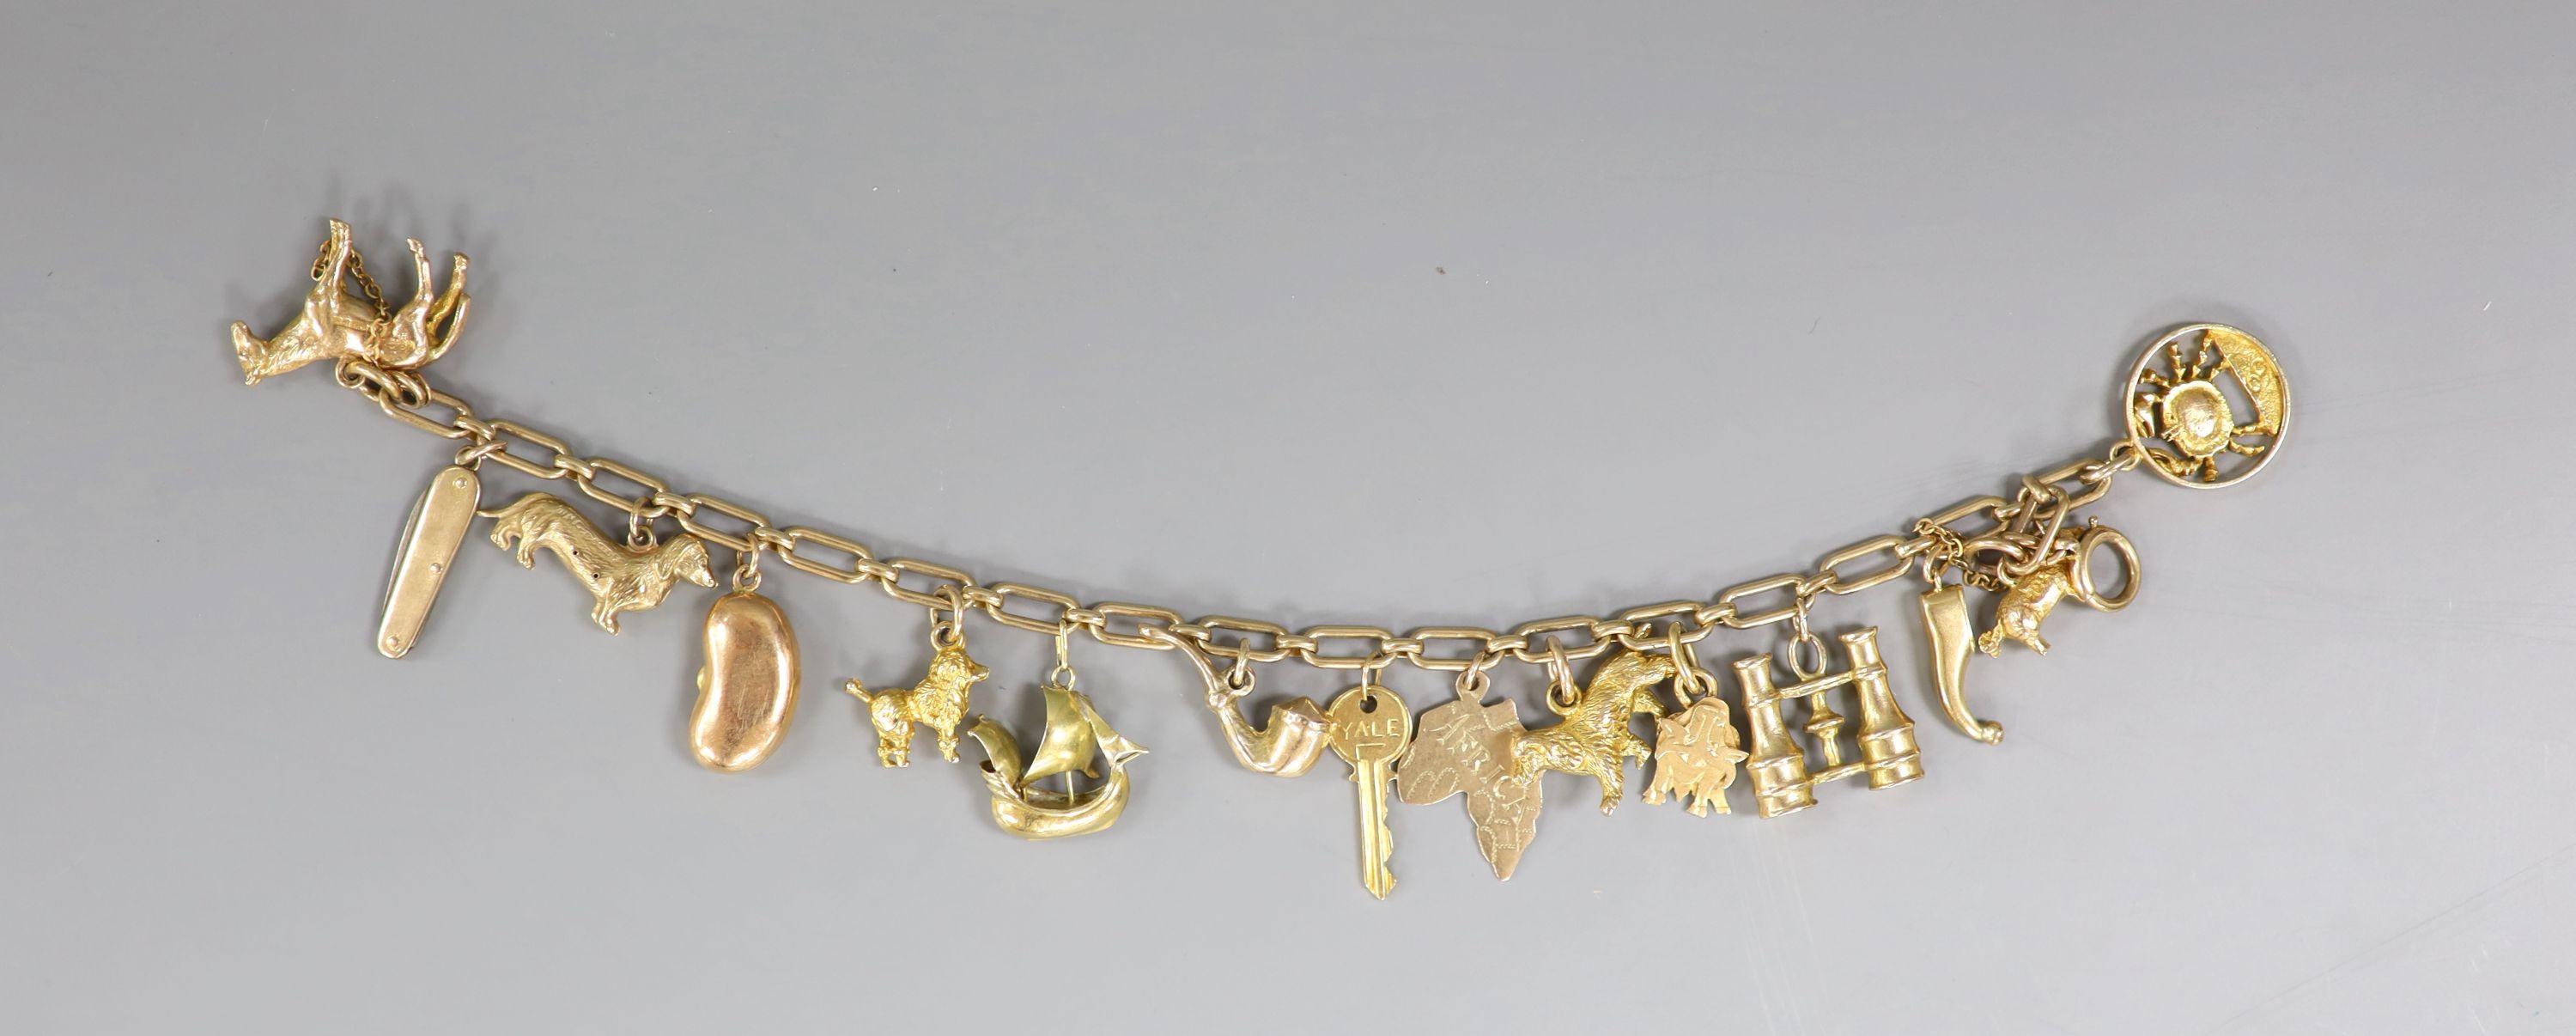 A 9ct oval link charm bracelet, hung with assorted mainly 9ct gold charms, gross weight 31.5 grams.